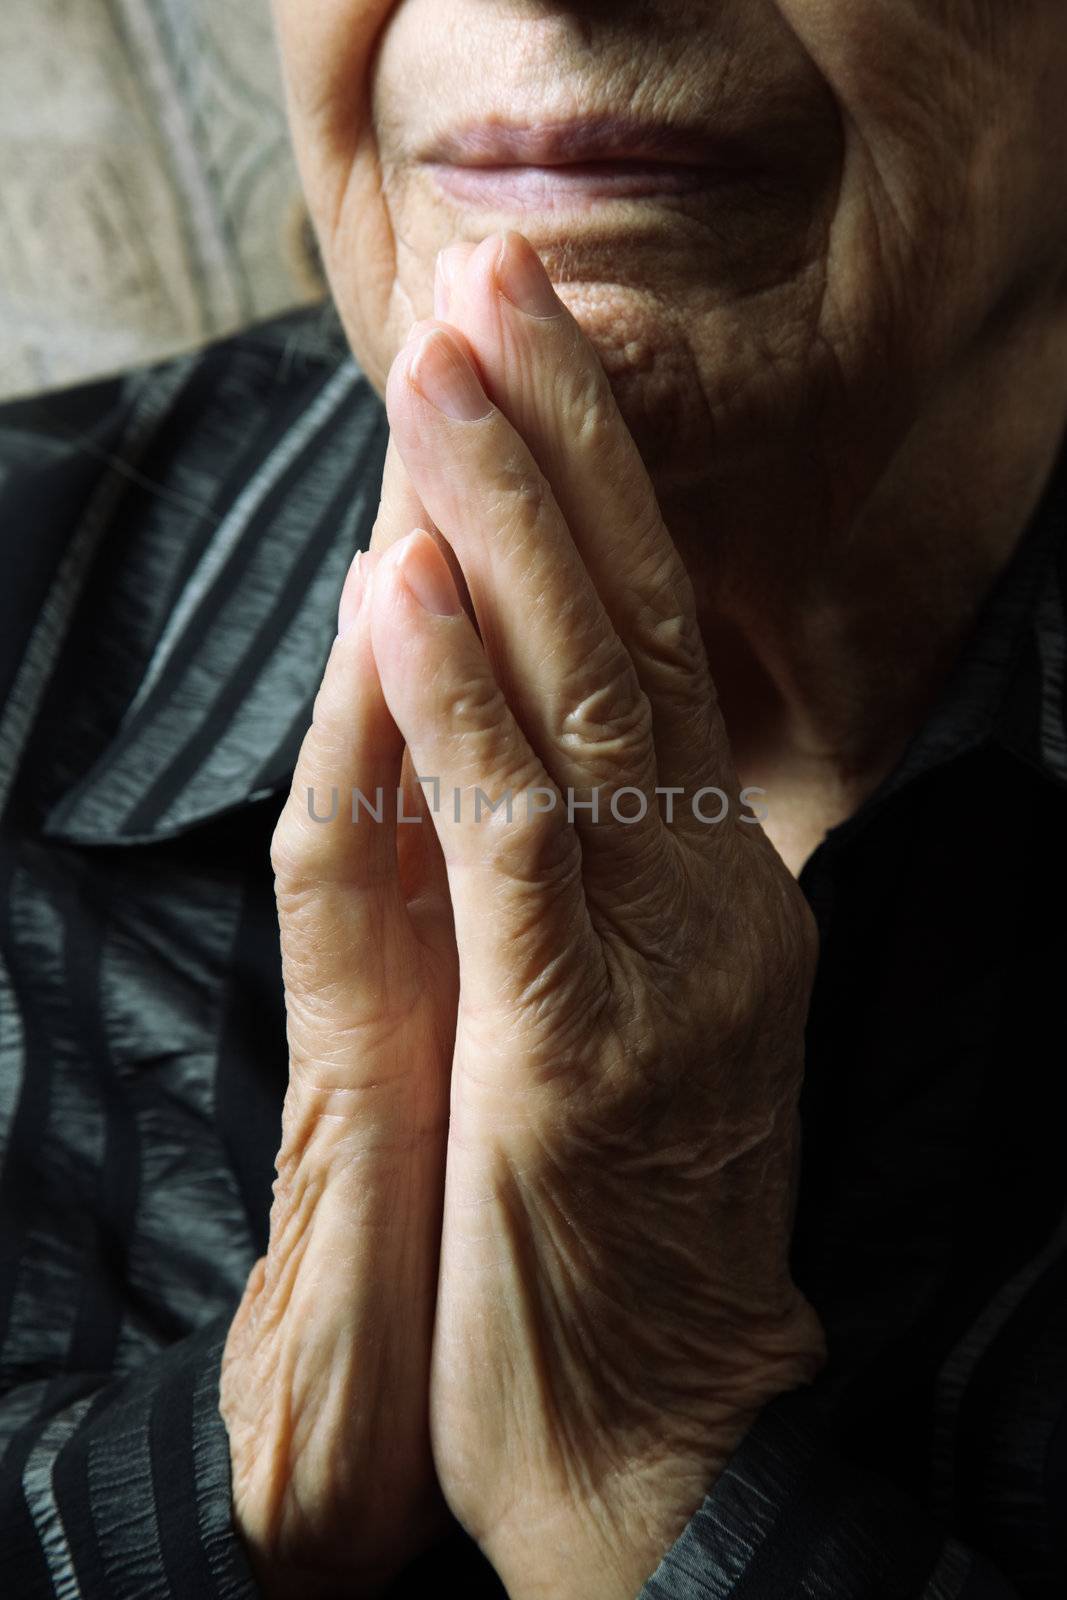 senior concept, special toned photo f/x, selective focus on nearest fingers